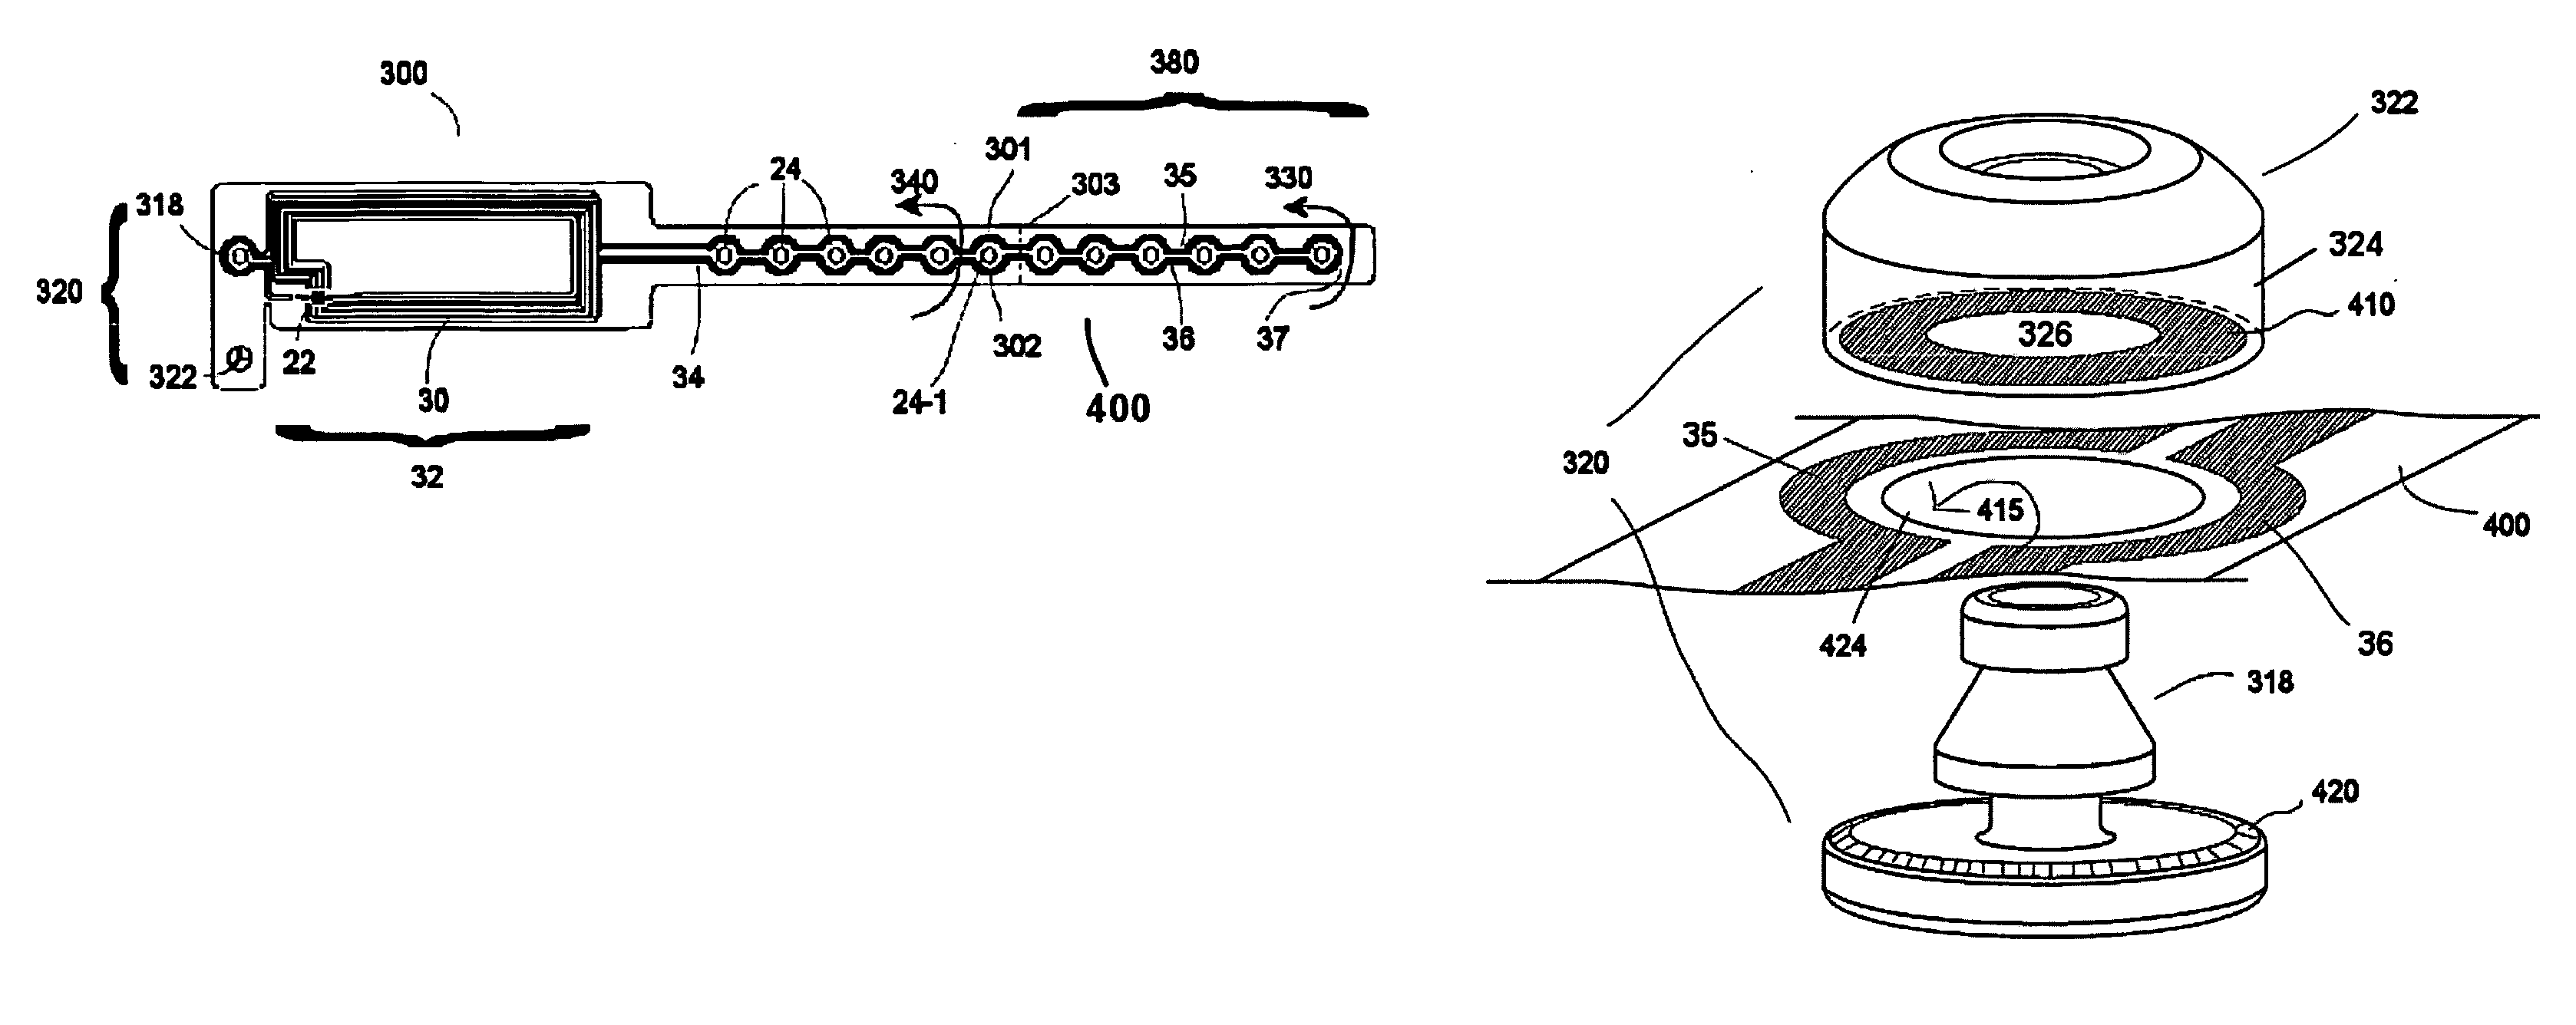 Identification band using a conductive fastening for enhanced security and functionality